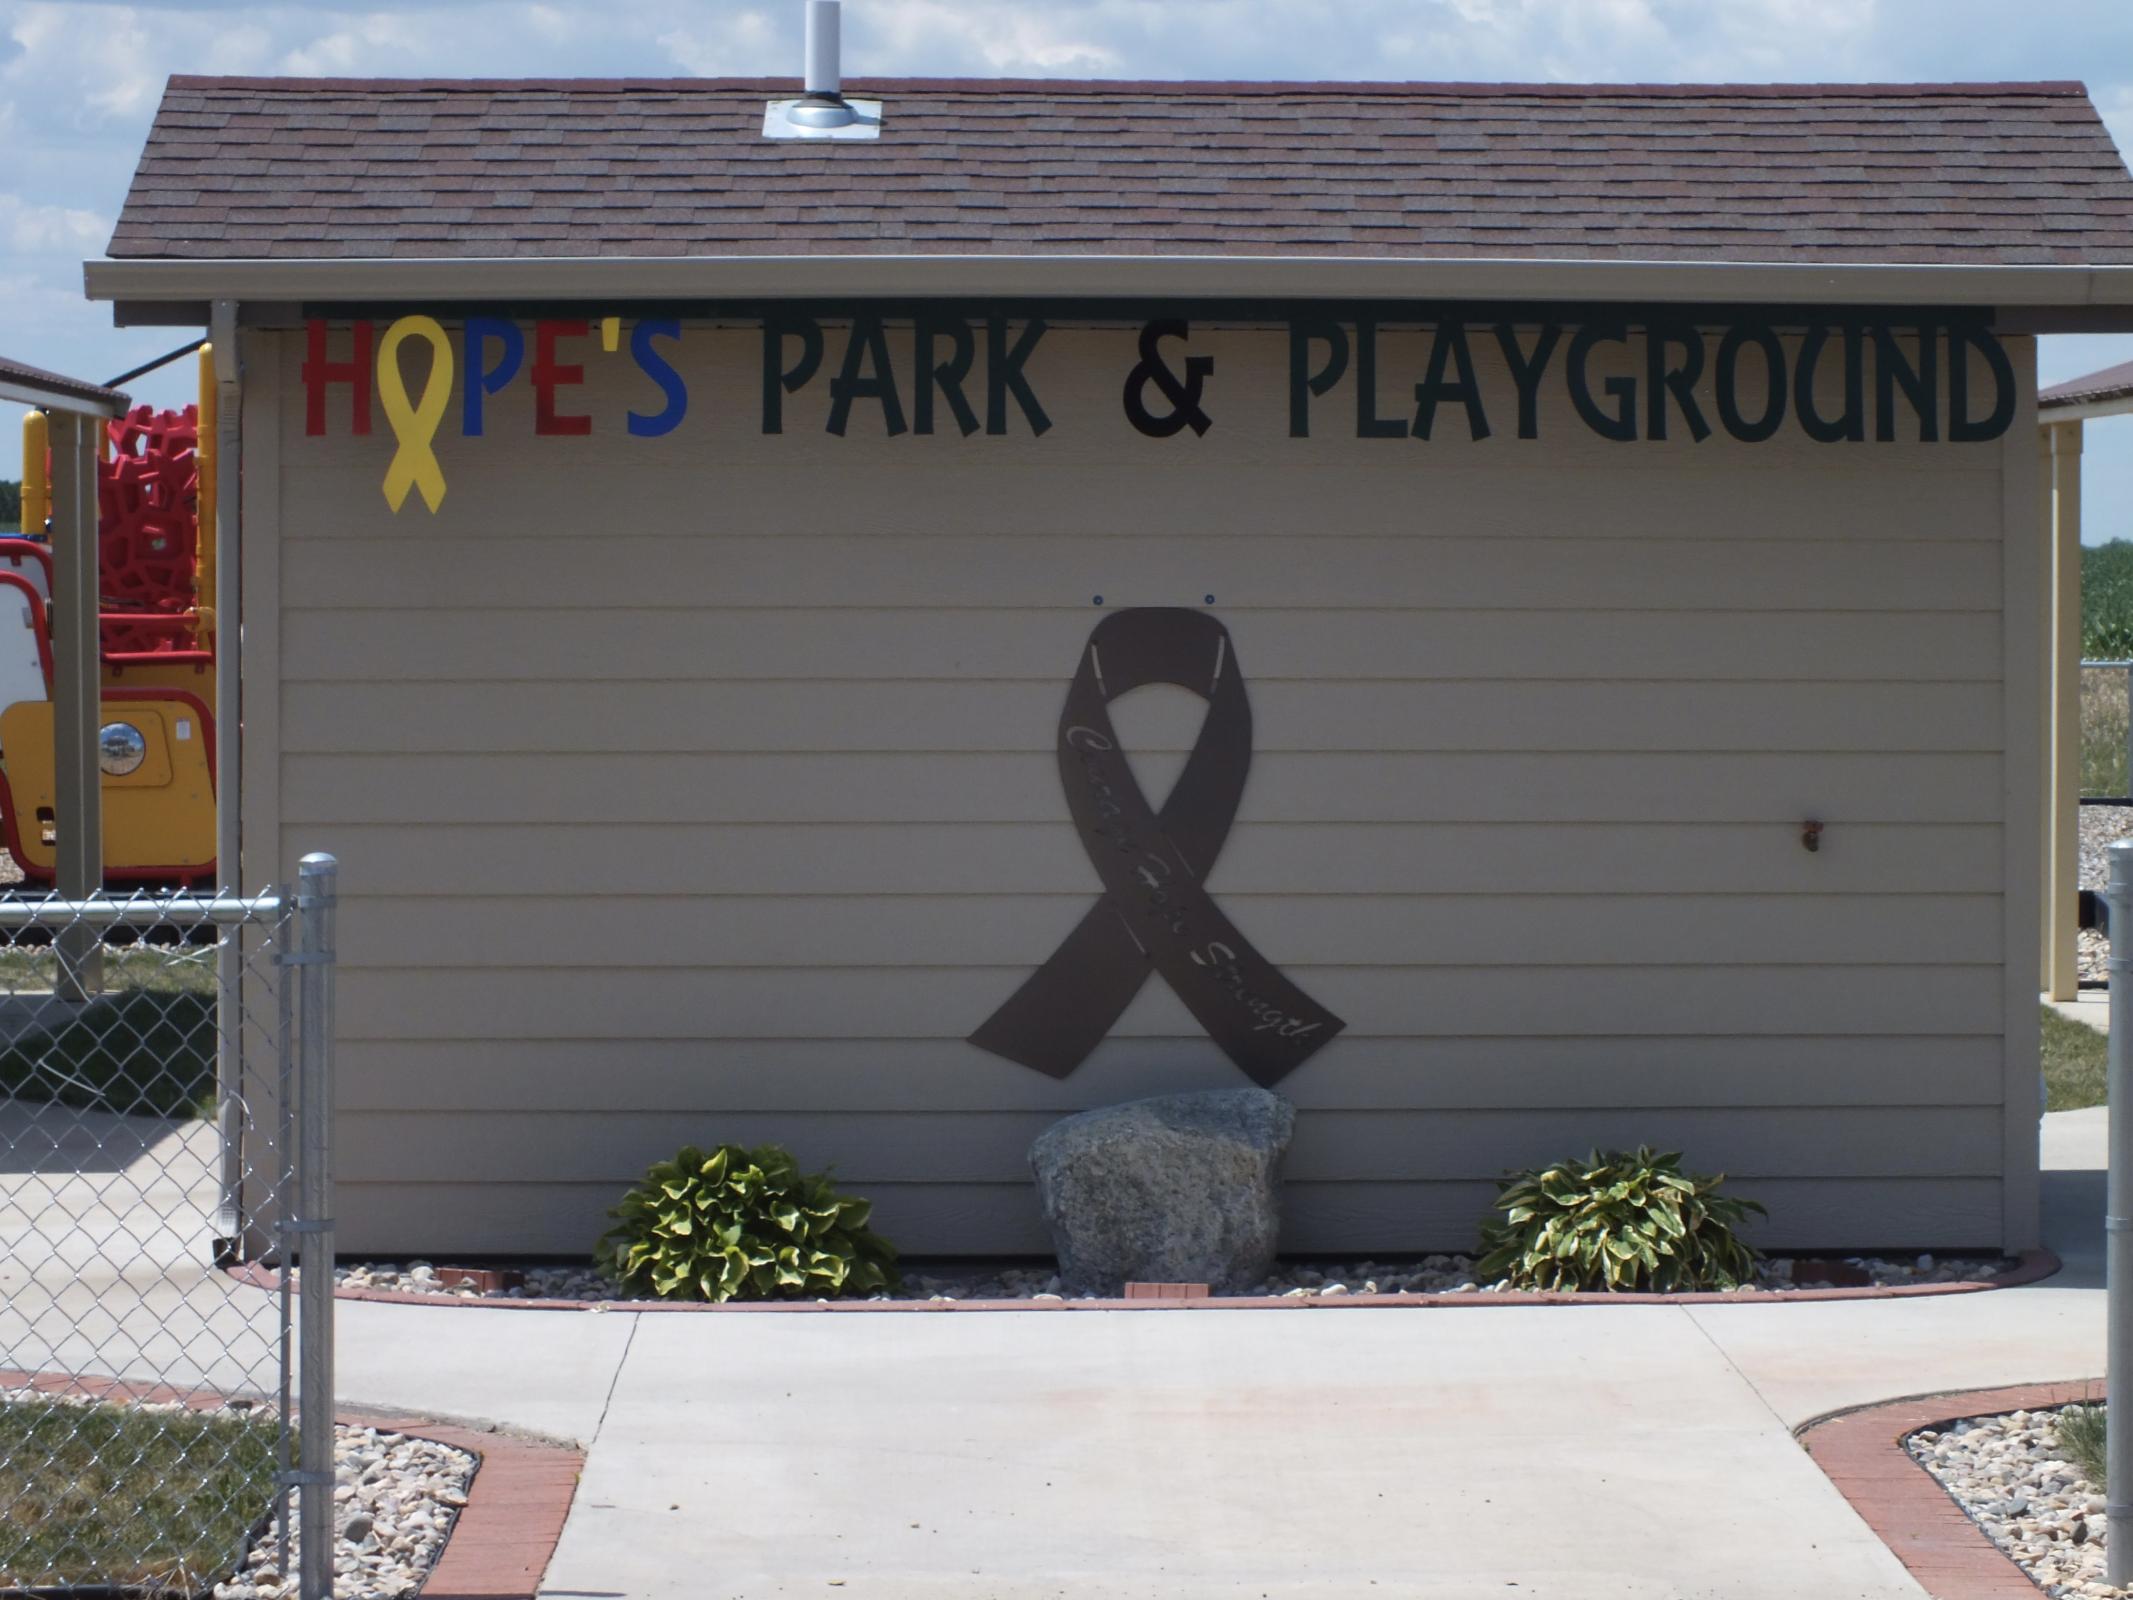 Hopes Park and Playground(2)'s image